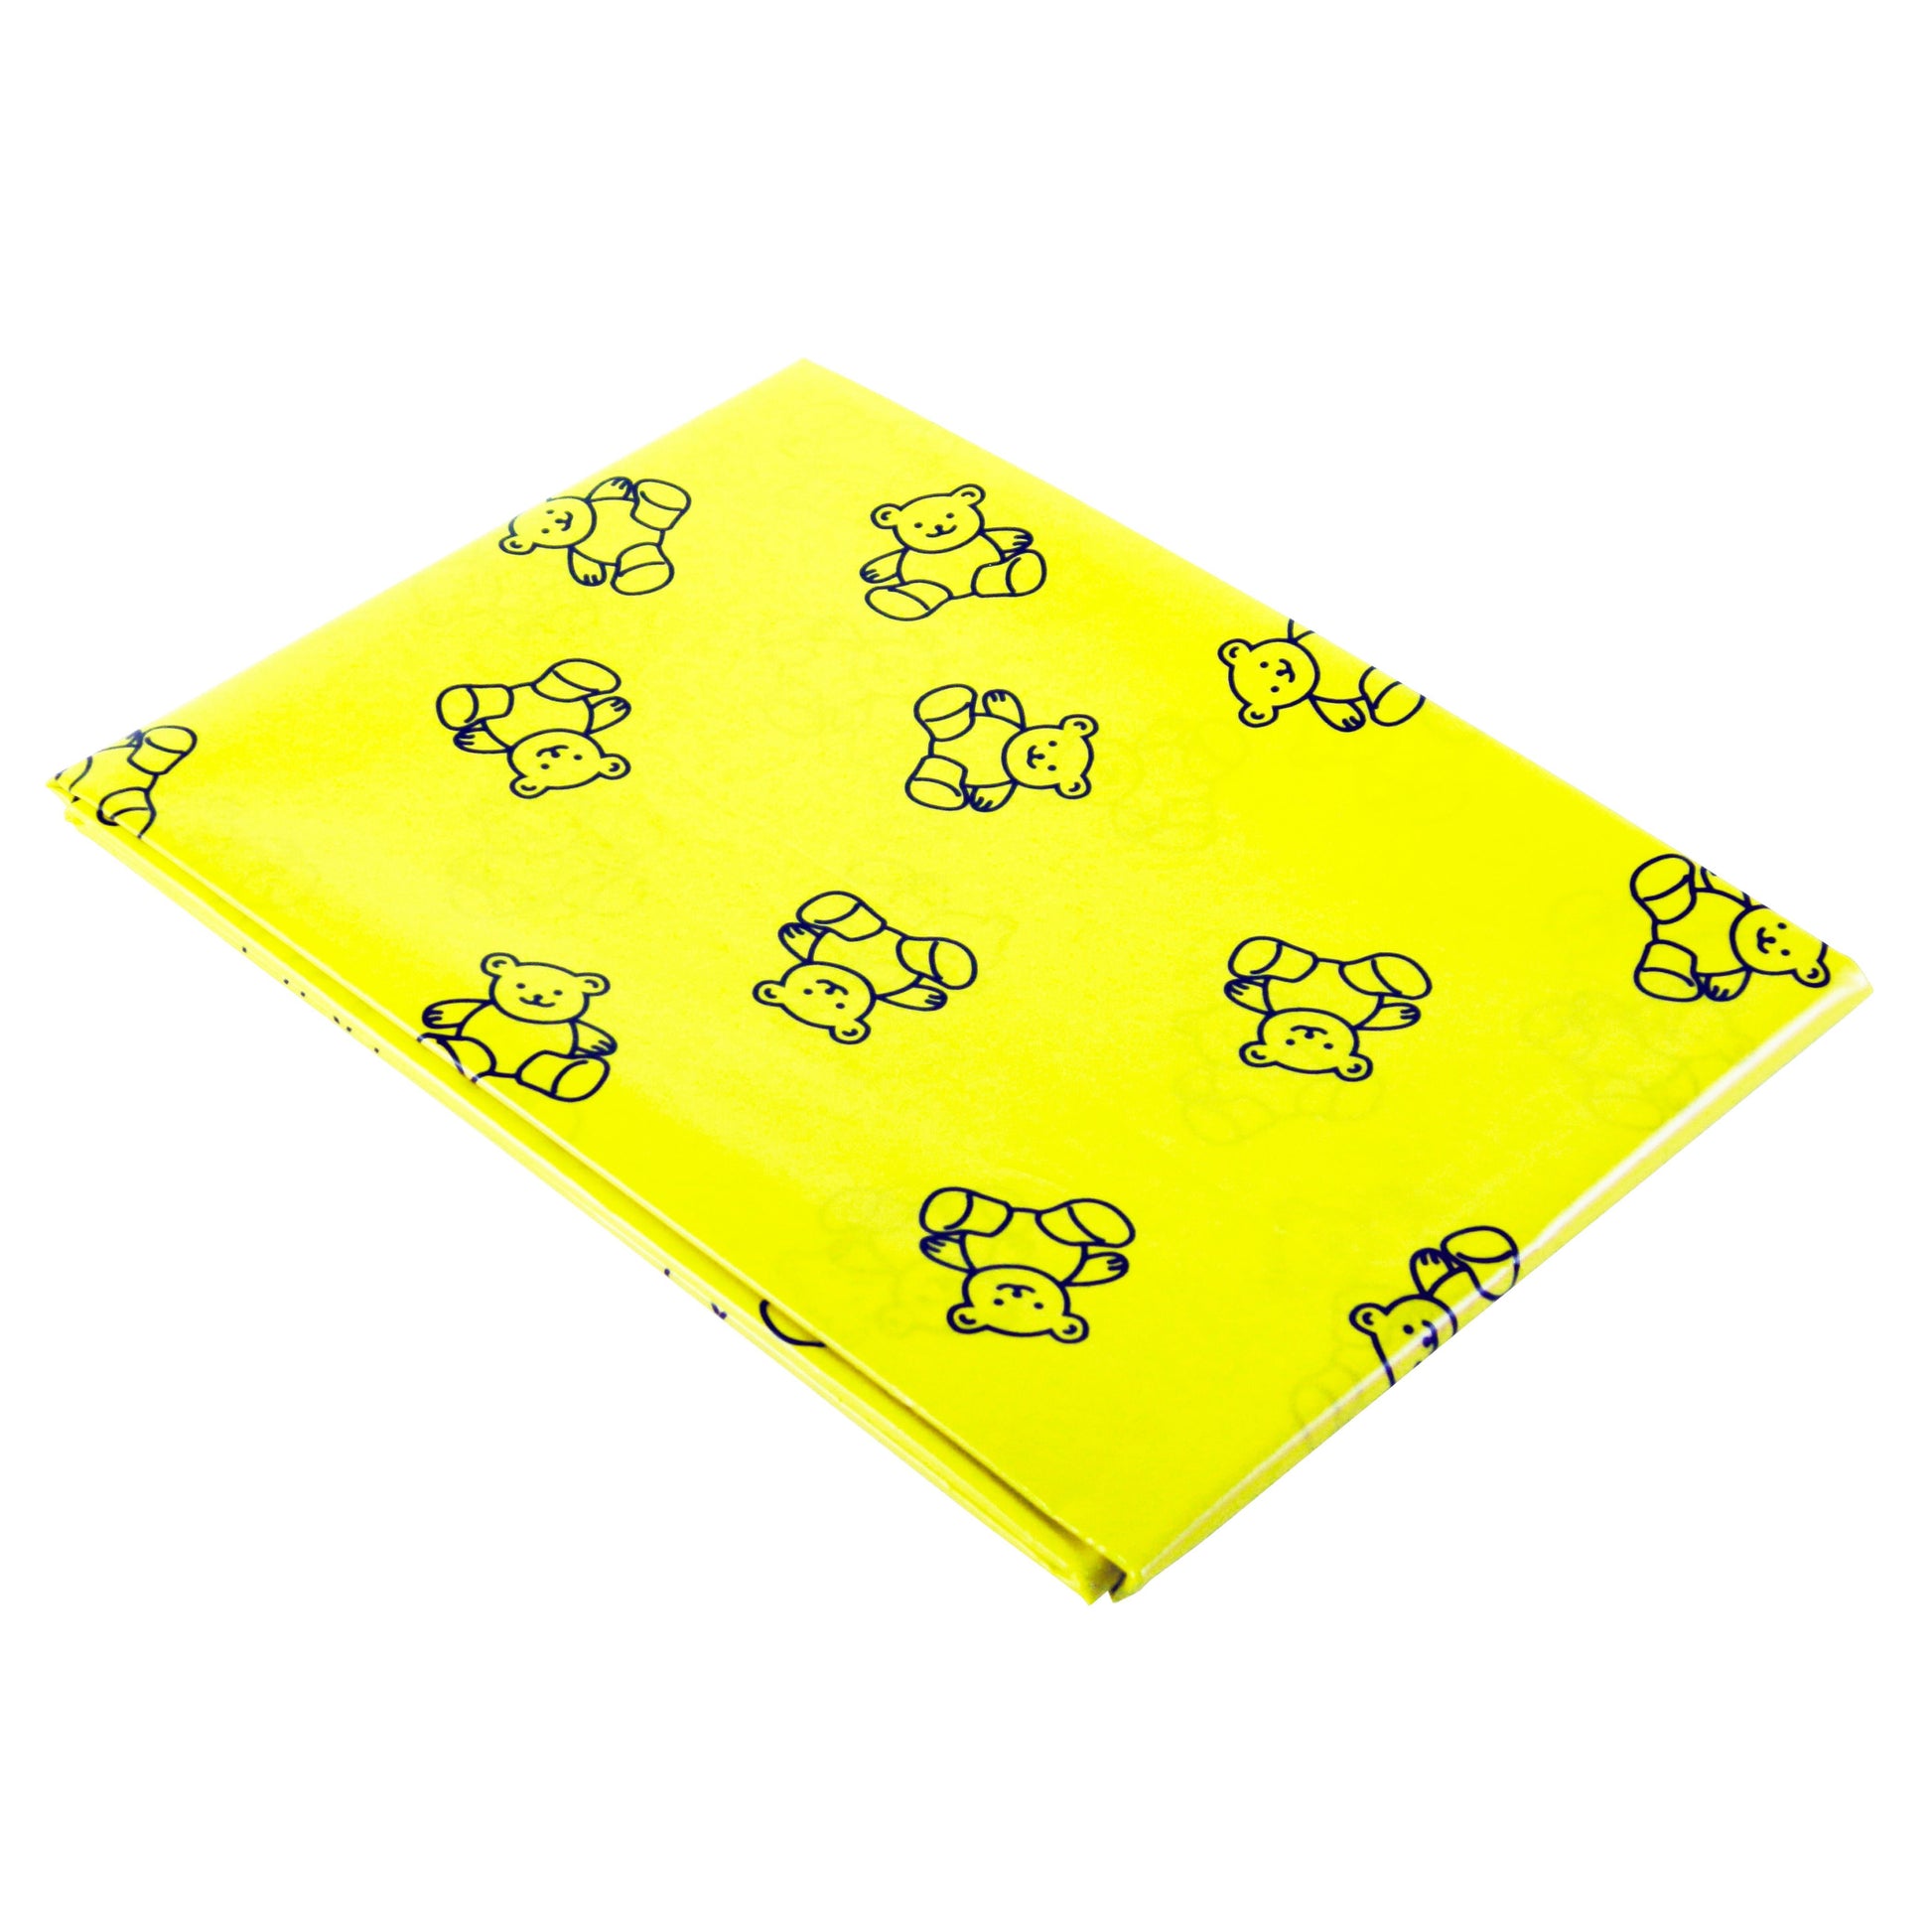 Yellow Teddy Splashmat Table Covering | Learning and Exploring Through Play